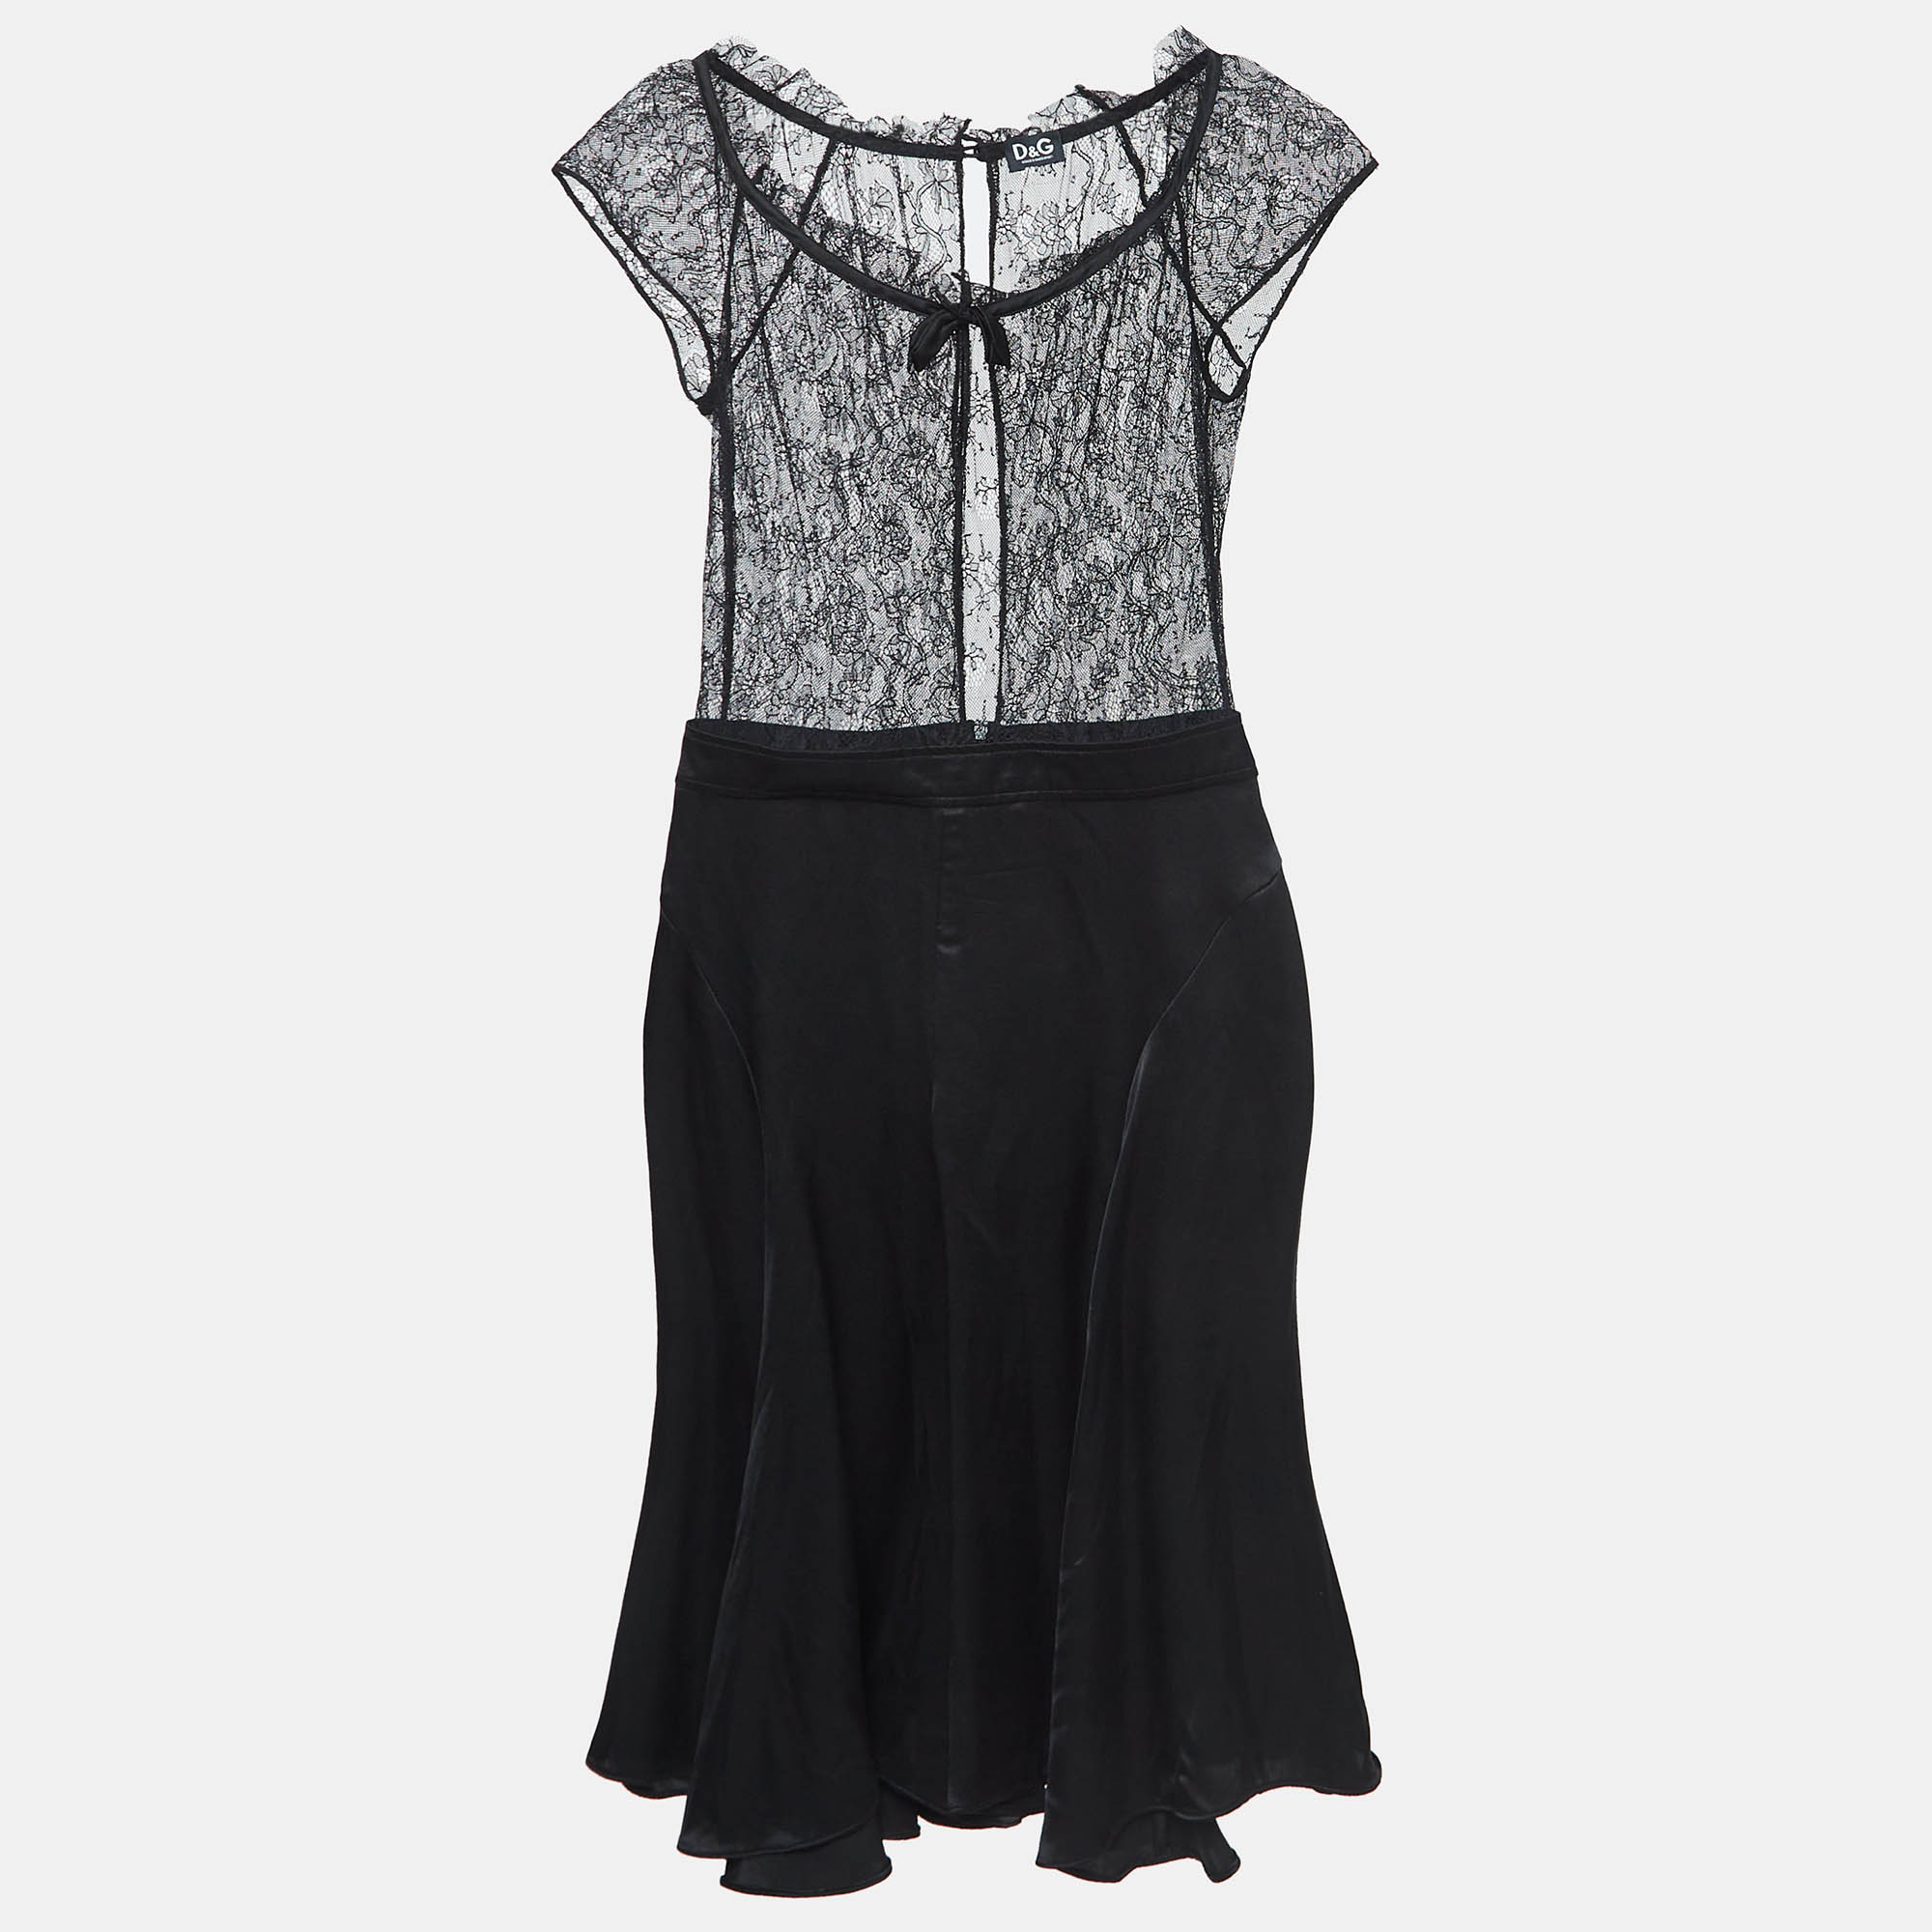 

D&G Black Lace and Satin Flared Short Dress